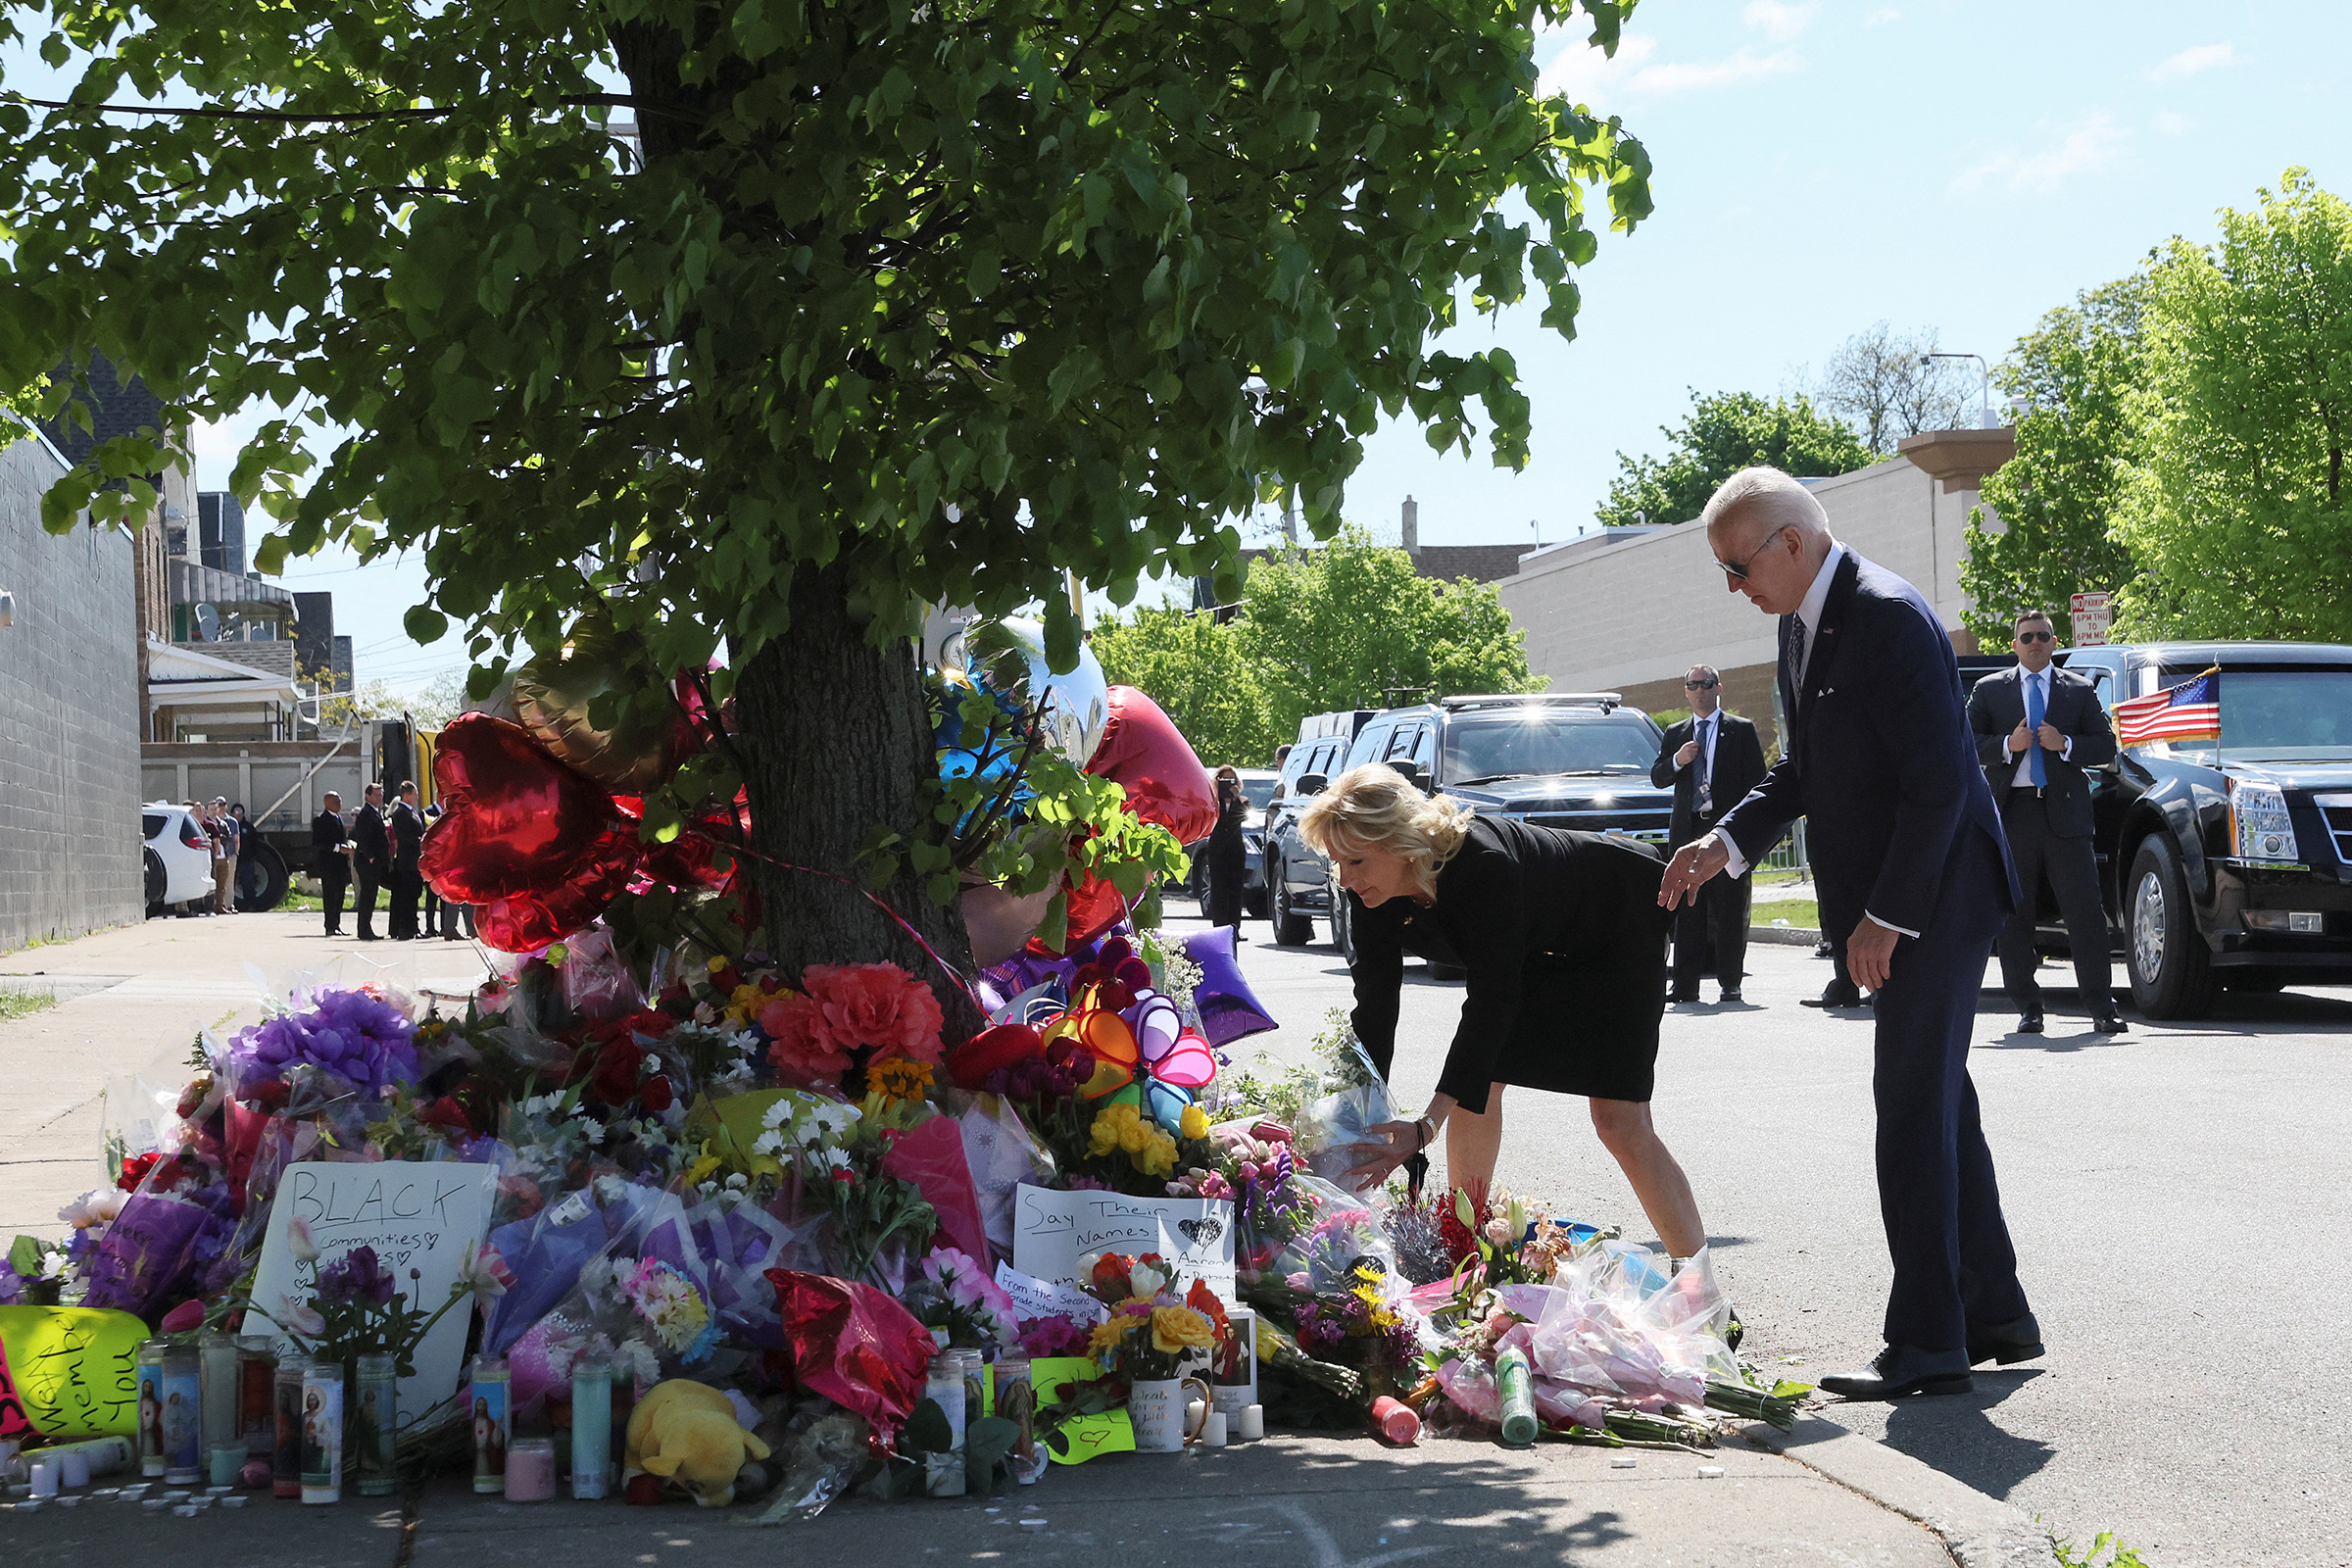 U.S. President Joe Biden and first lady Jill Biden pay their respects to the 10 people killed in a mass shooting by a gunman authorities say was motivated by racism, at the Tops Friendly Markets memorial site in Buffalo, N.Y. on May 17. (Leah Millis—Reuters)